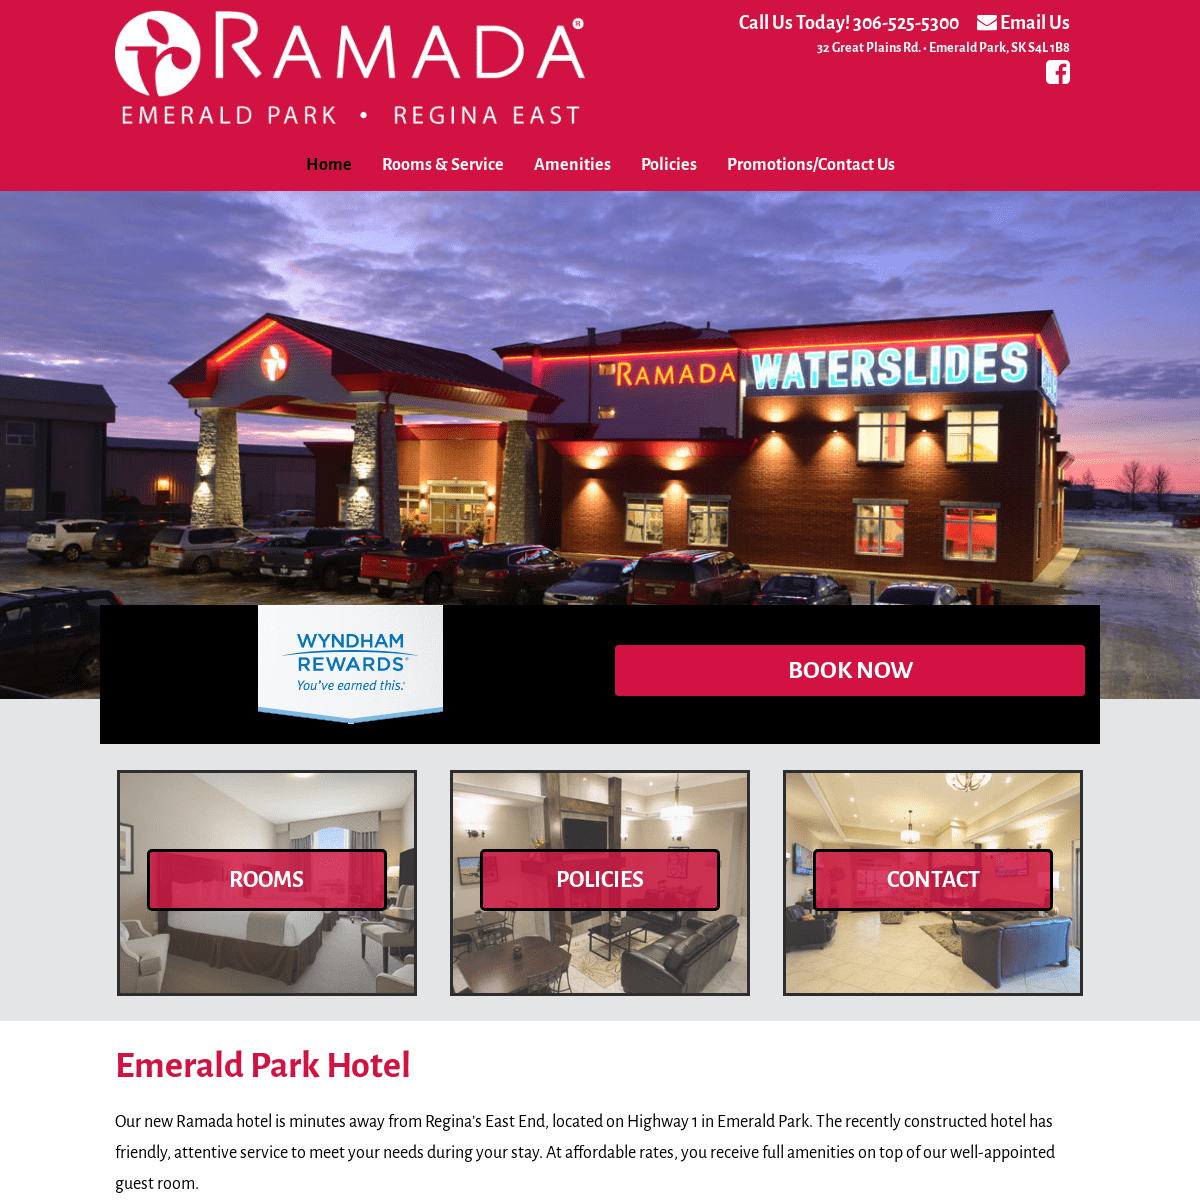 A complete backup of ramadaemeraldpark.com